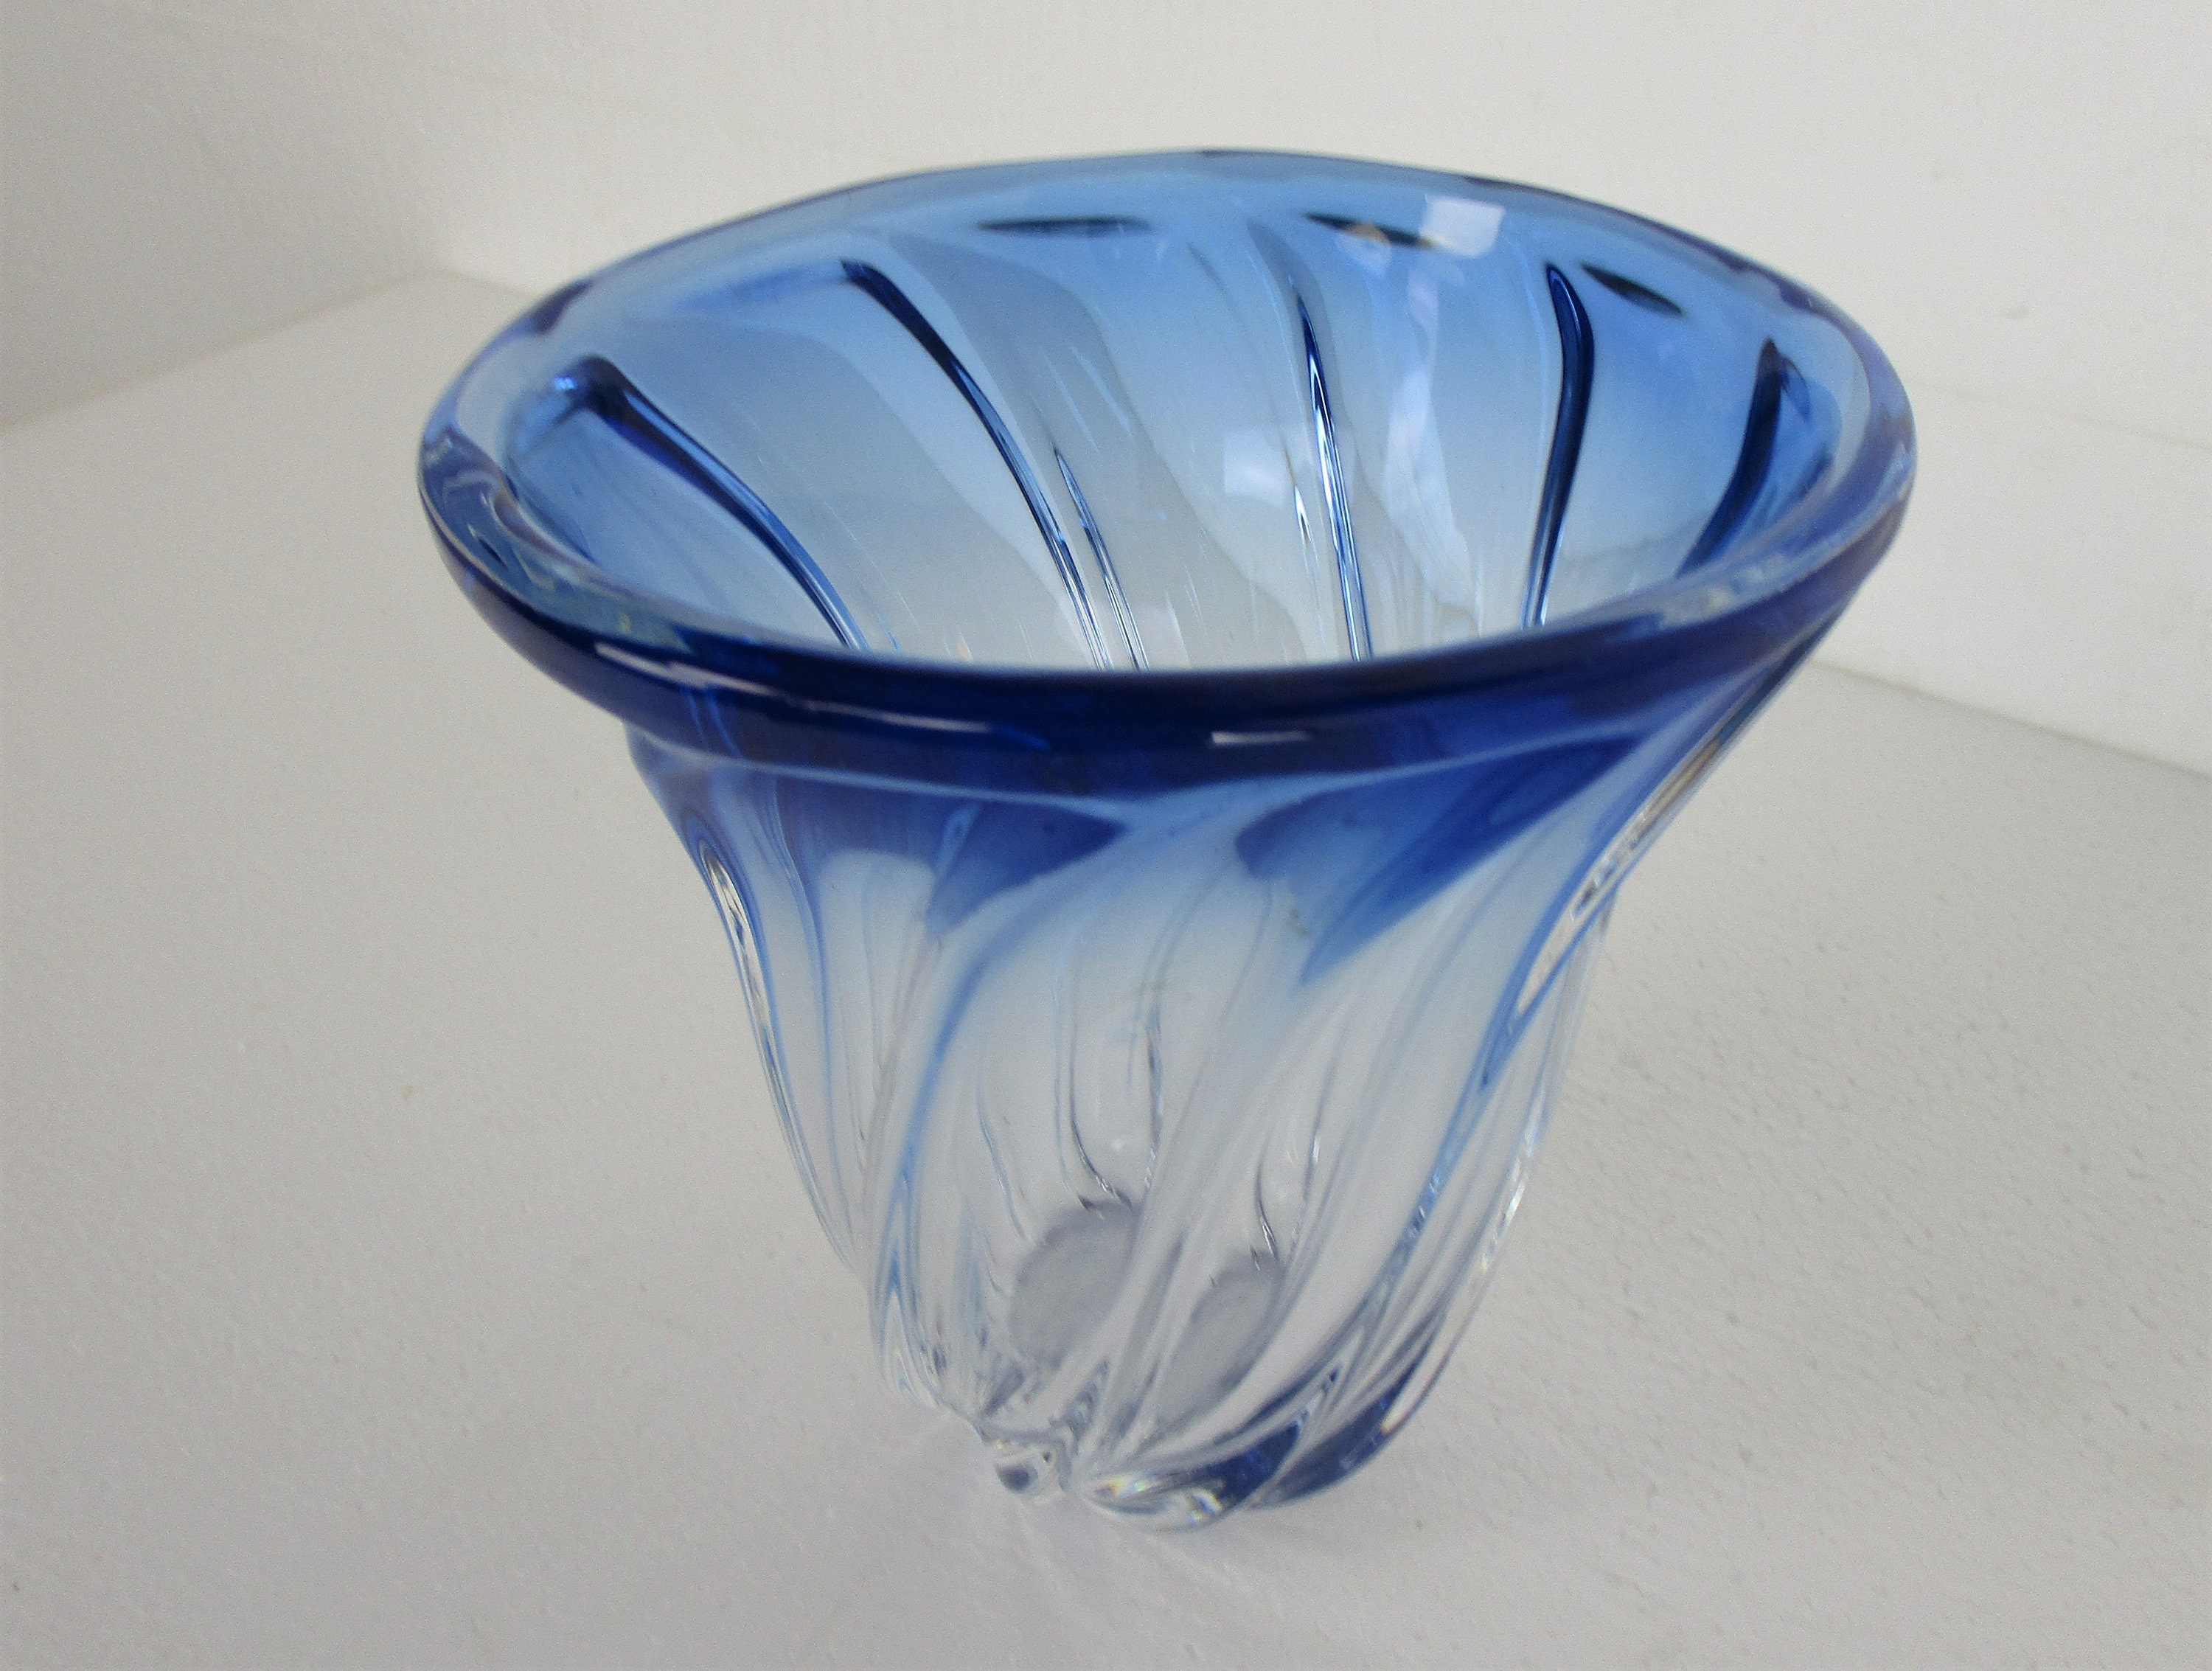 Collectors Heavy art the to glass Glass Vase Clear Marked in Lambert - Art Blue Cobalt Deco Twisted St House Val